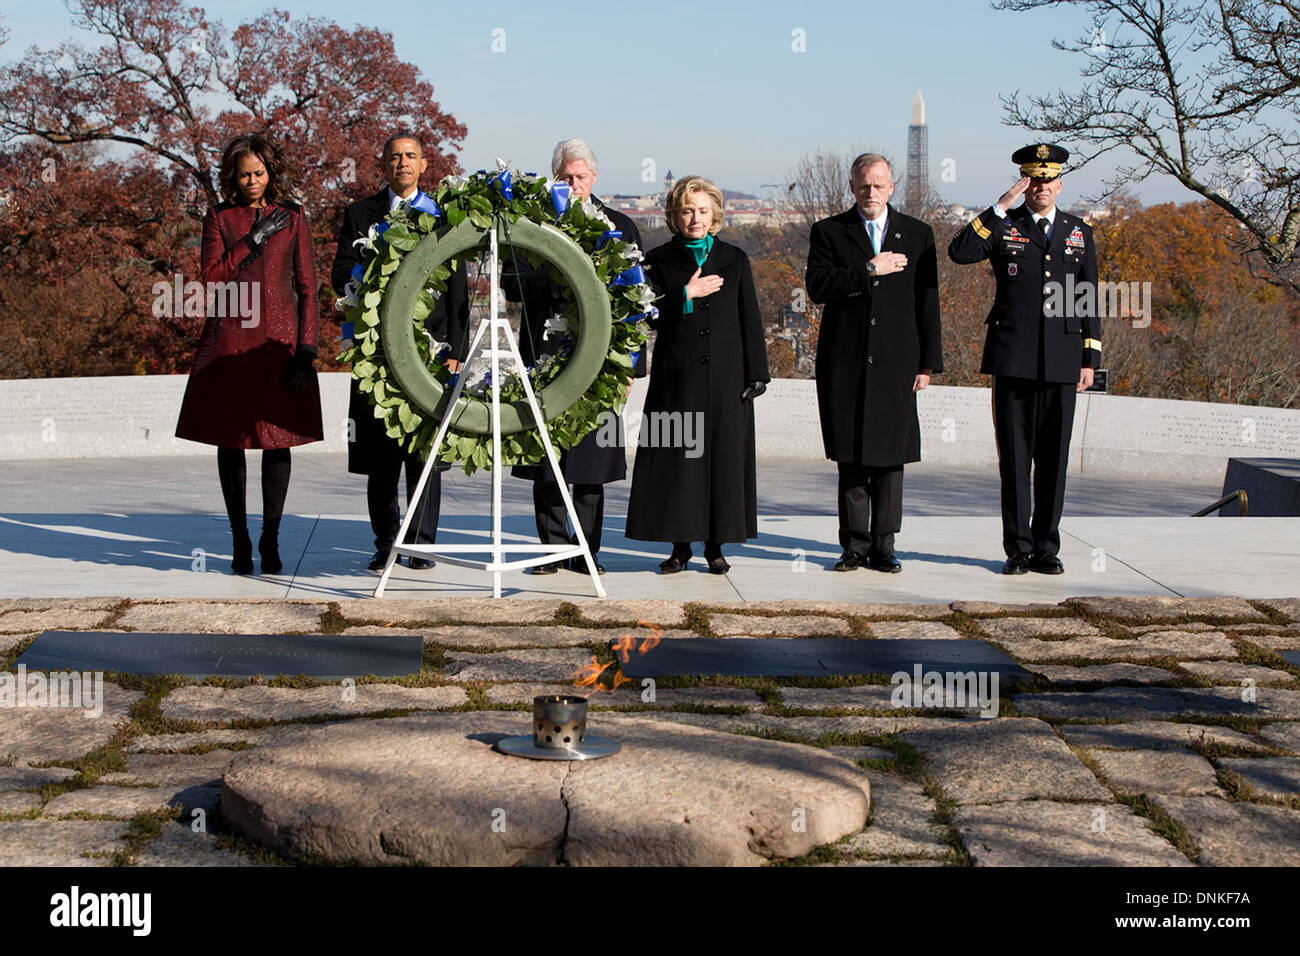 US President Barack Obama stands with First Lady Michelle Obama, former President Bill Clinton, Hillary Clinton and others during a wreath laying ceremony at the gravesite of President John F. Kennedy at Arlington National Cemetery to mark the 50th anniversary of the assassination November 20, 2013 in Arlington, VA. Stock Photo